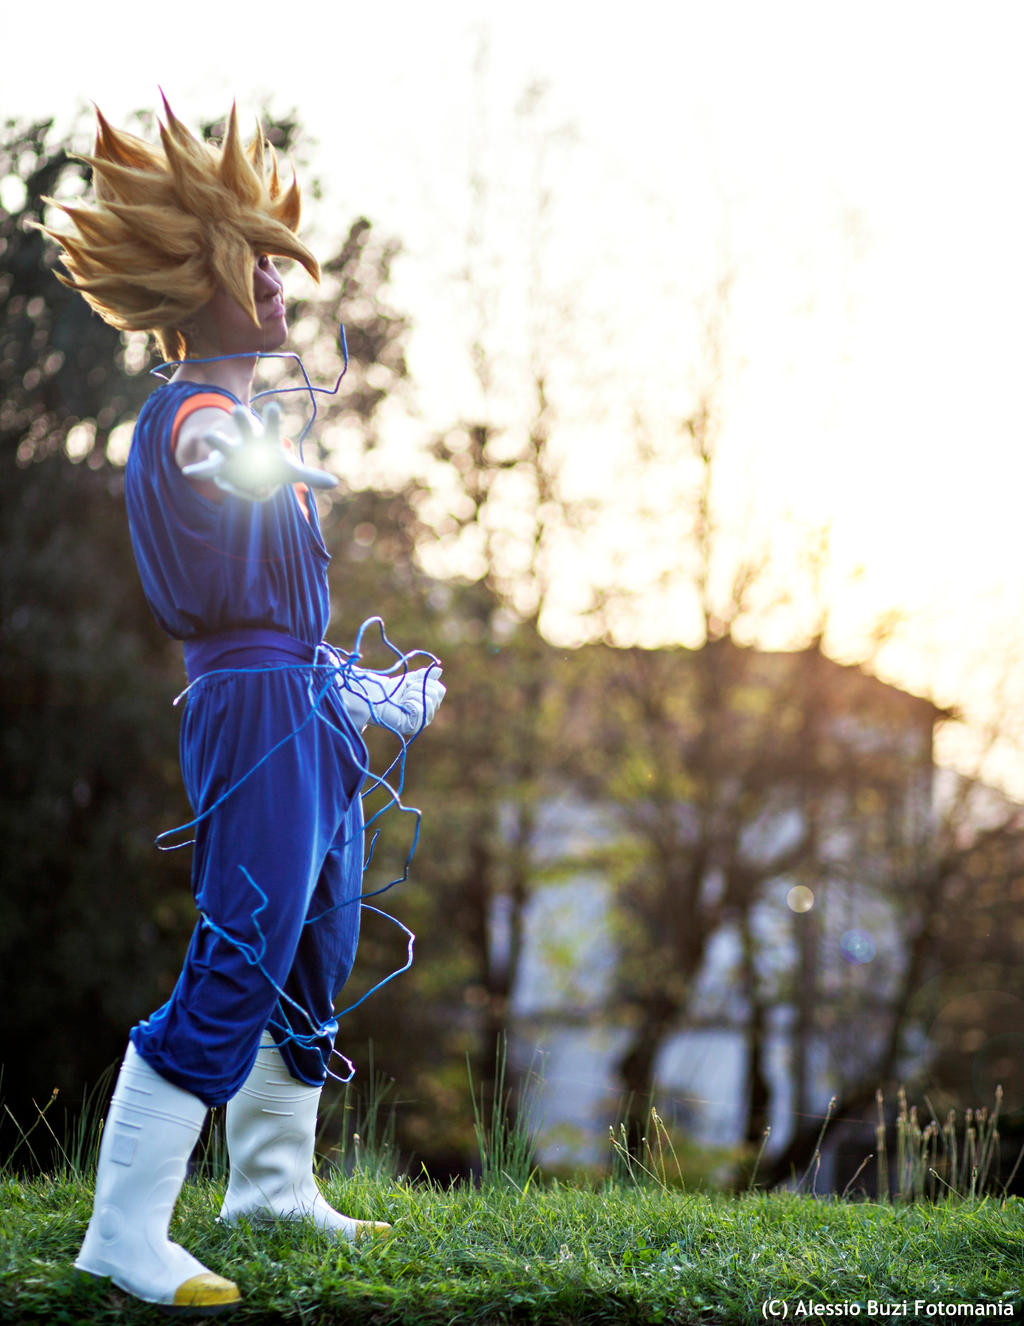 Vegetto cosplay .:The power of fusion:.